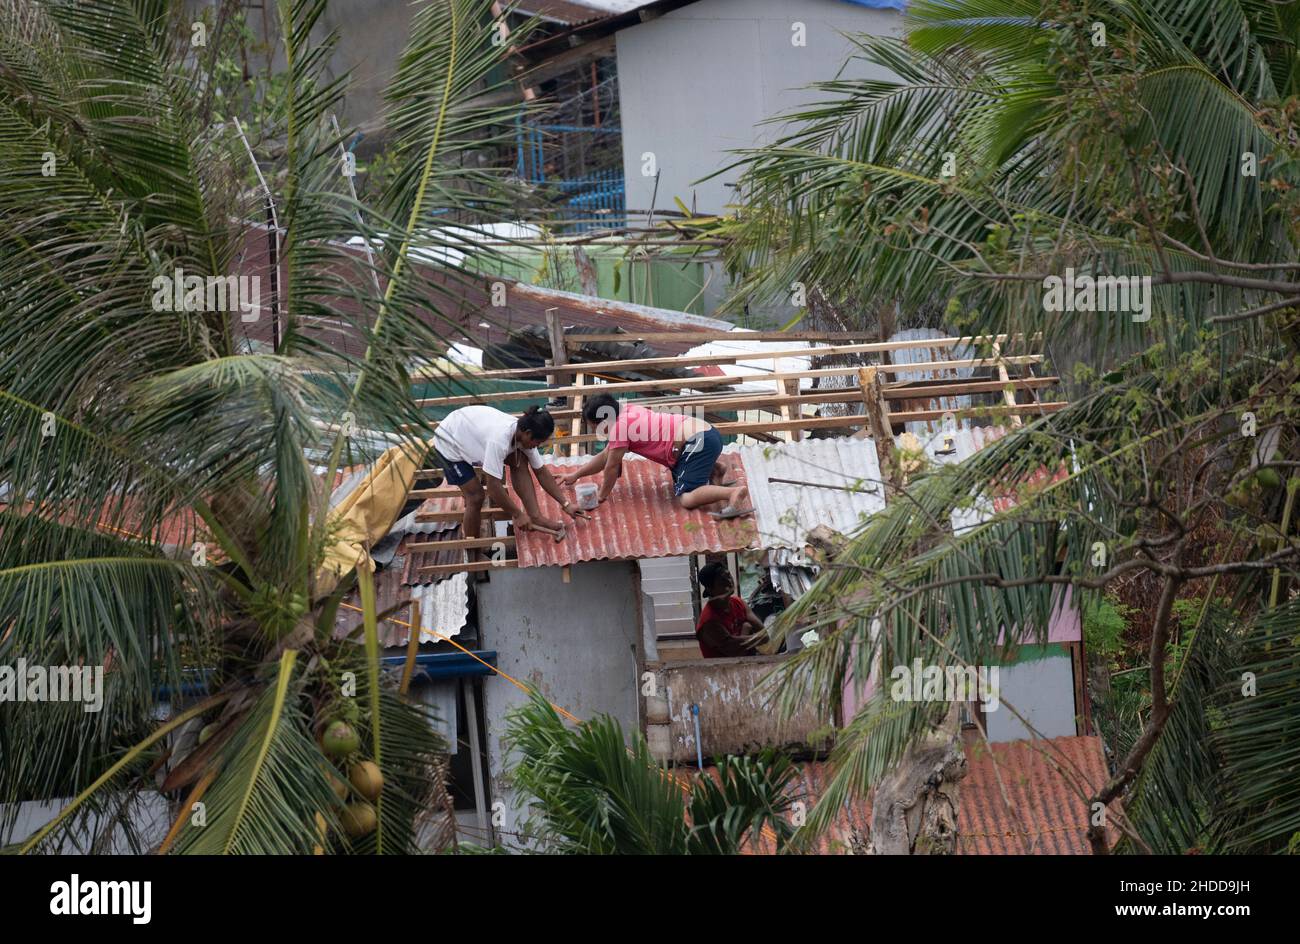 Two men fixing the roof of a house severely damaged by Typhoon Odette (International name Rai) which struck the Philippines on 16th December 2021 Stock Photo